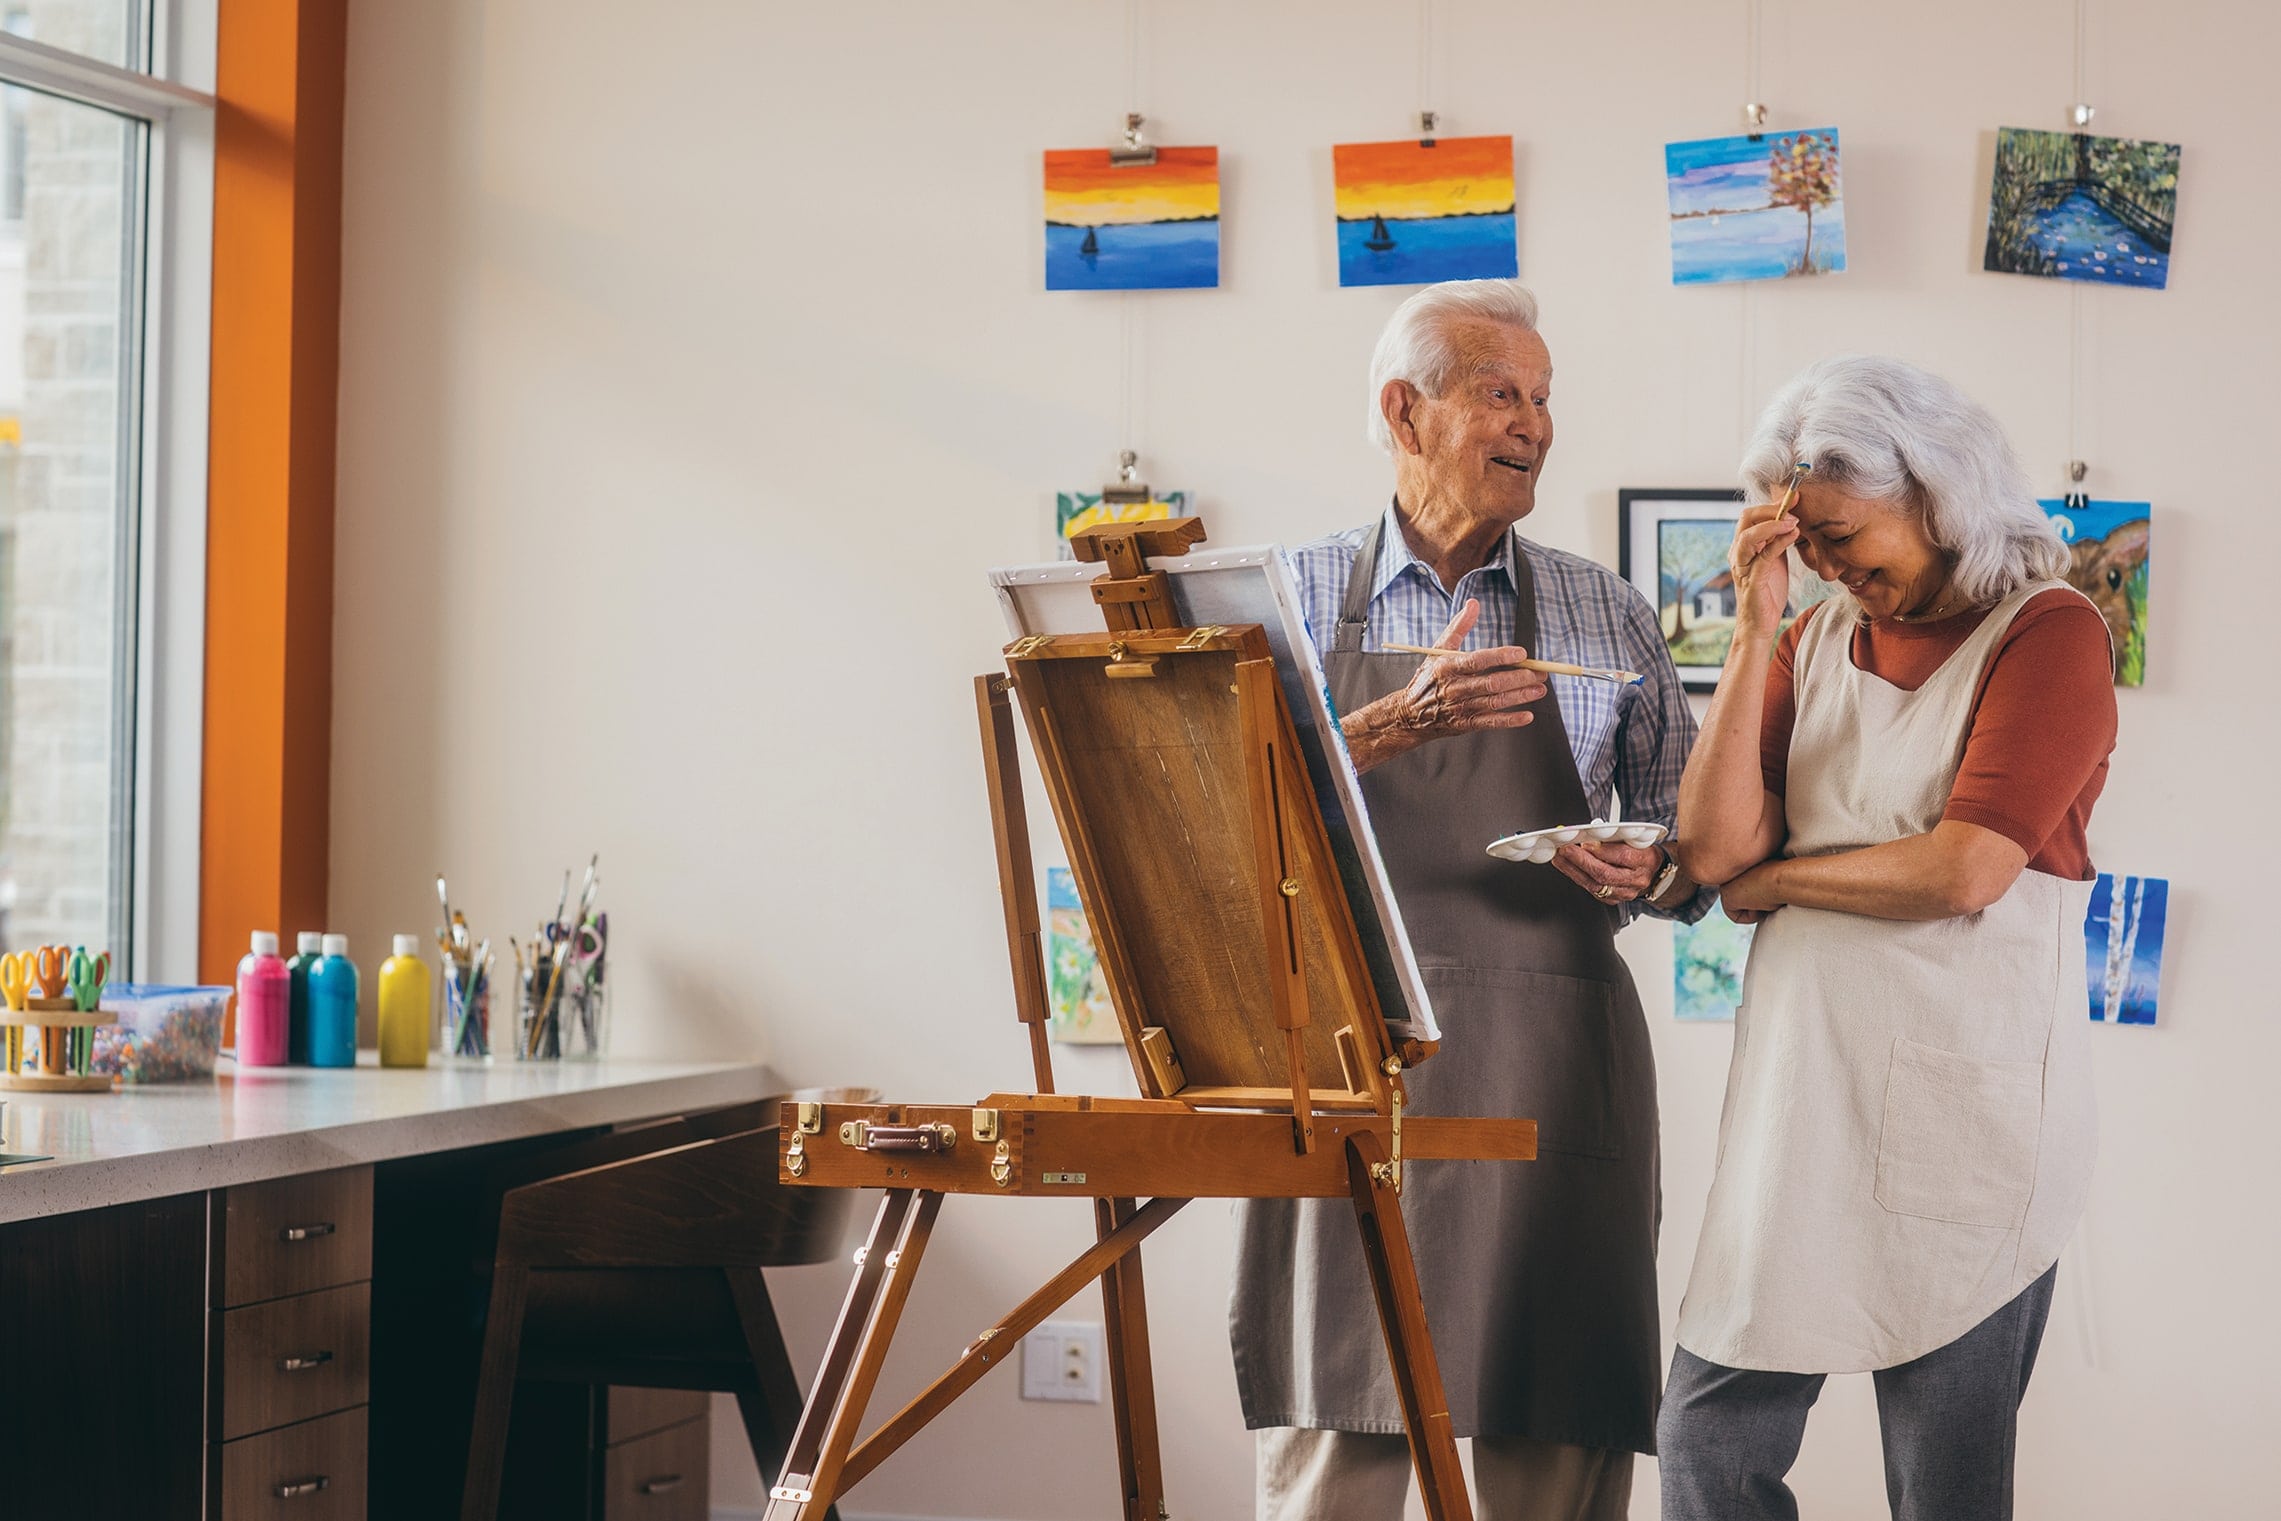 An image of two seniors laughing and painting.